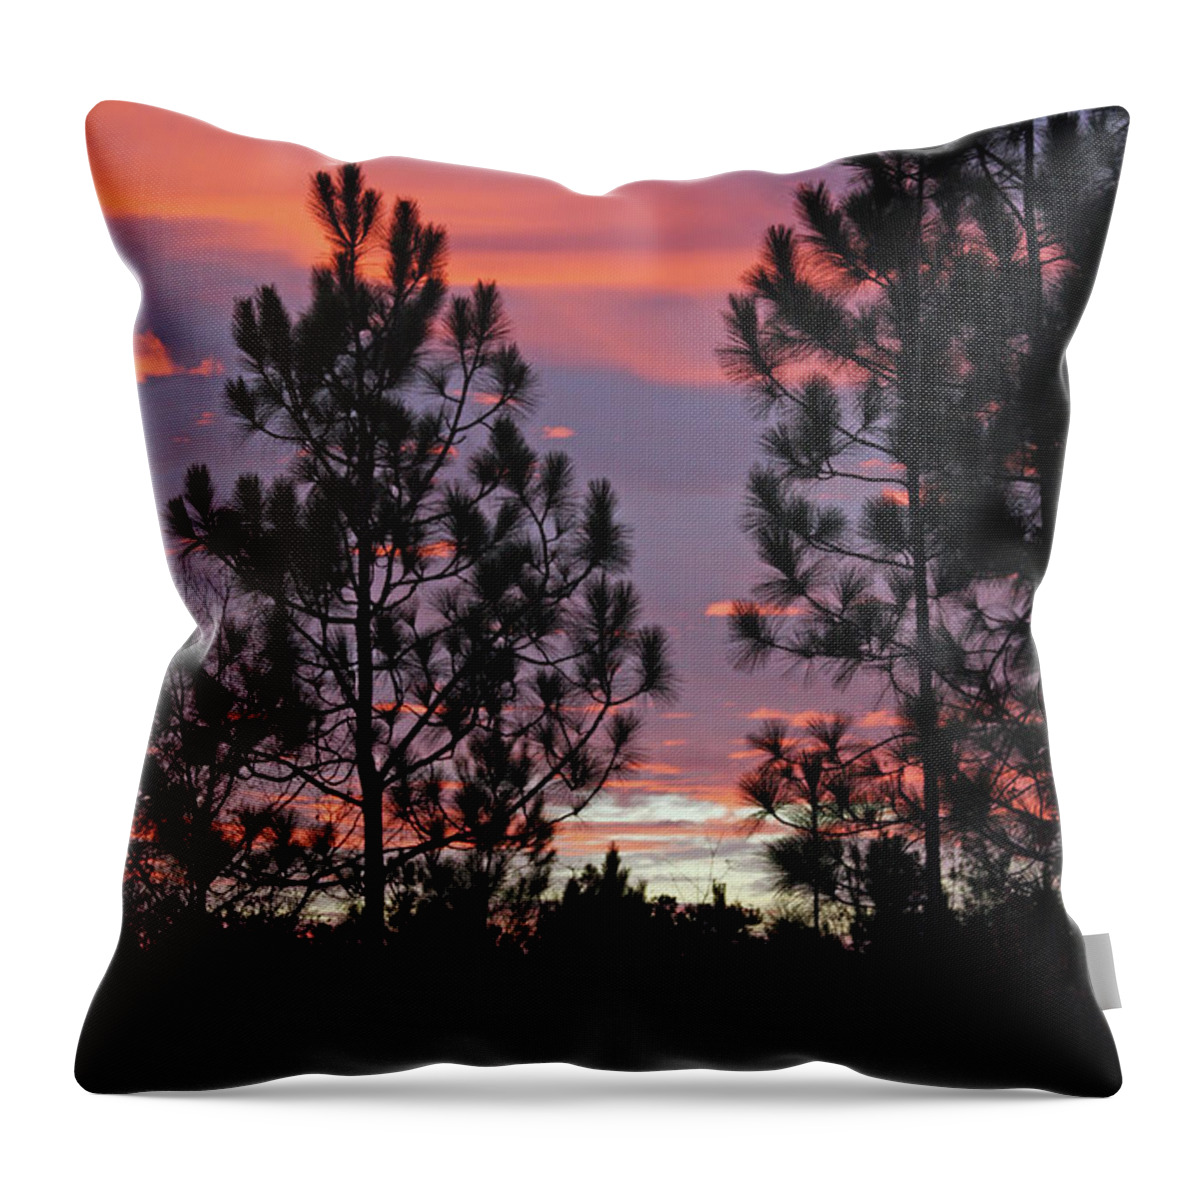 Sunset Throw Pillow featuring the photograph Carolina Sunset 4592 by Carolyn Stagger Cokley